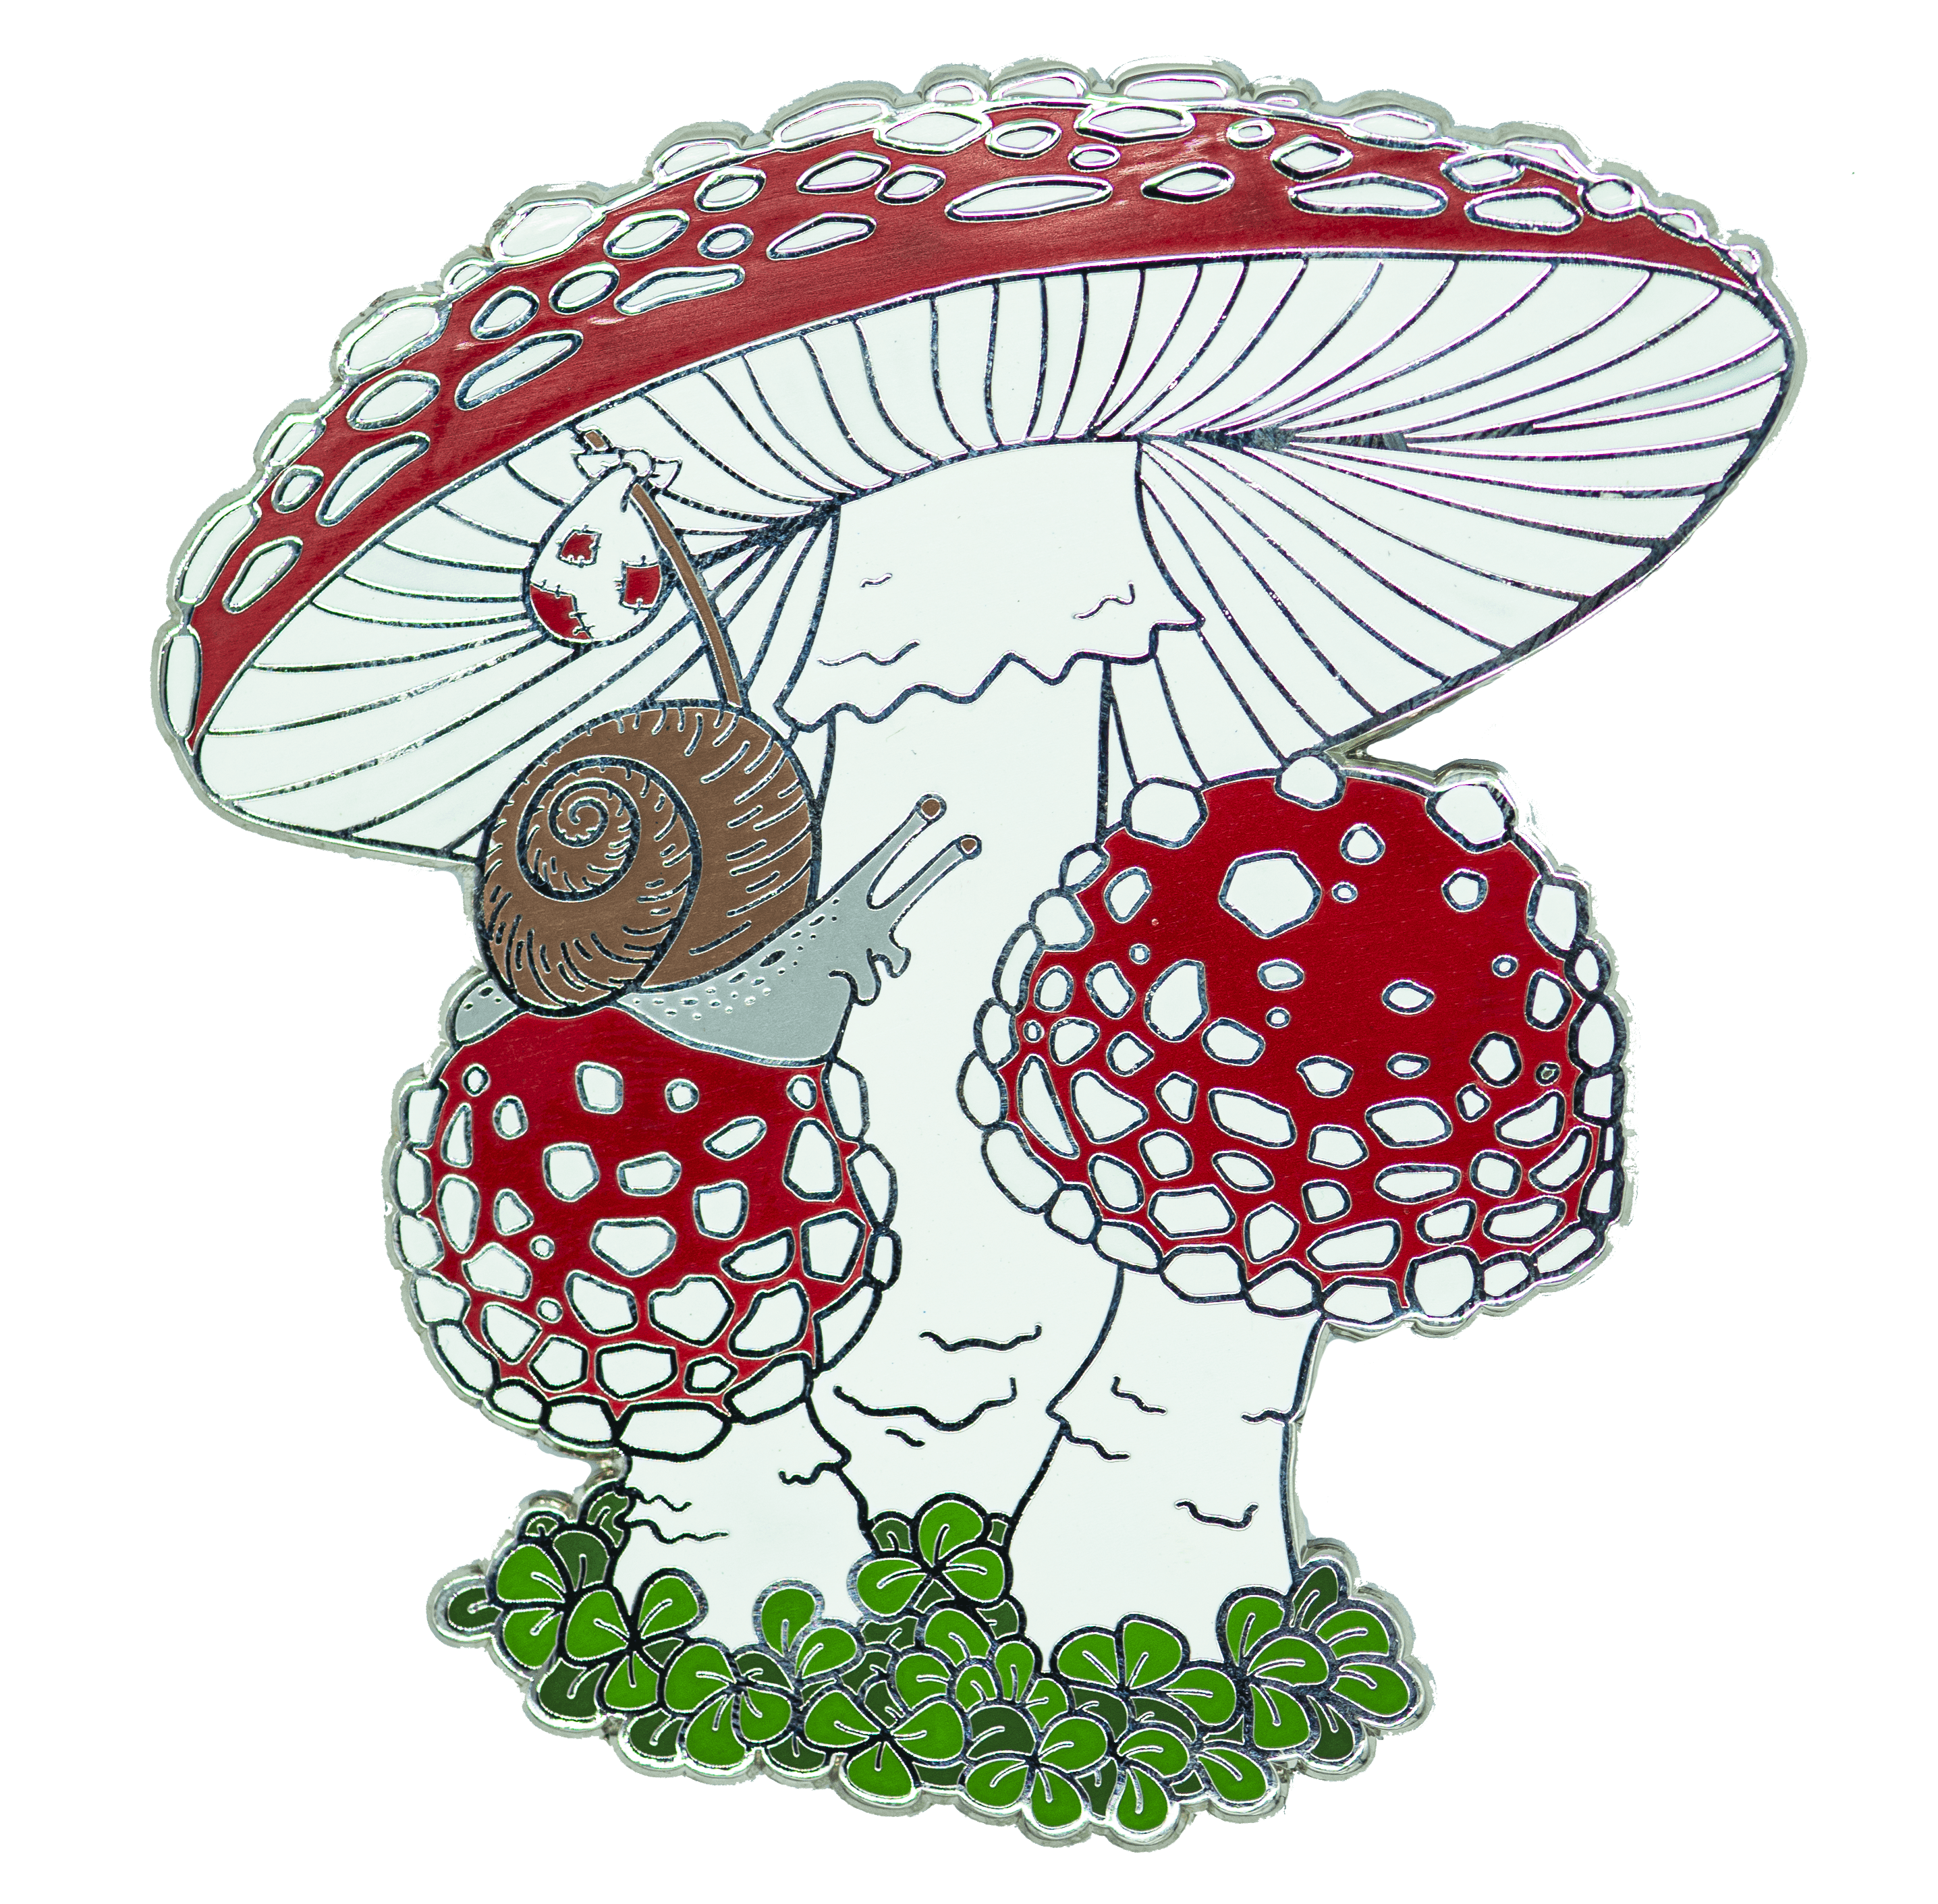 A large enamel pin featuring a snail carrying a bindle as he crawls over a trio of fly agaric mushrooms.